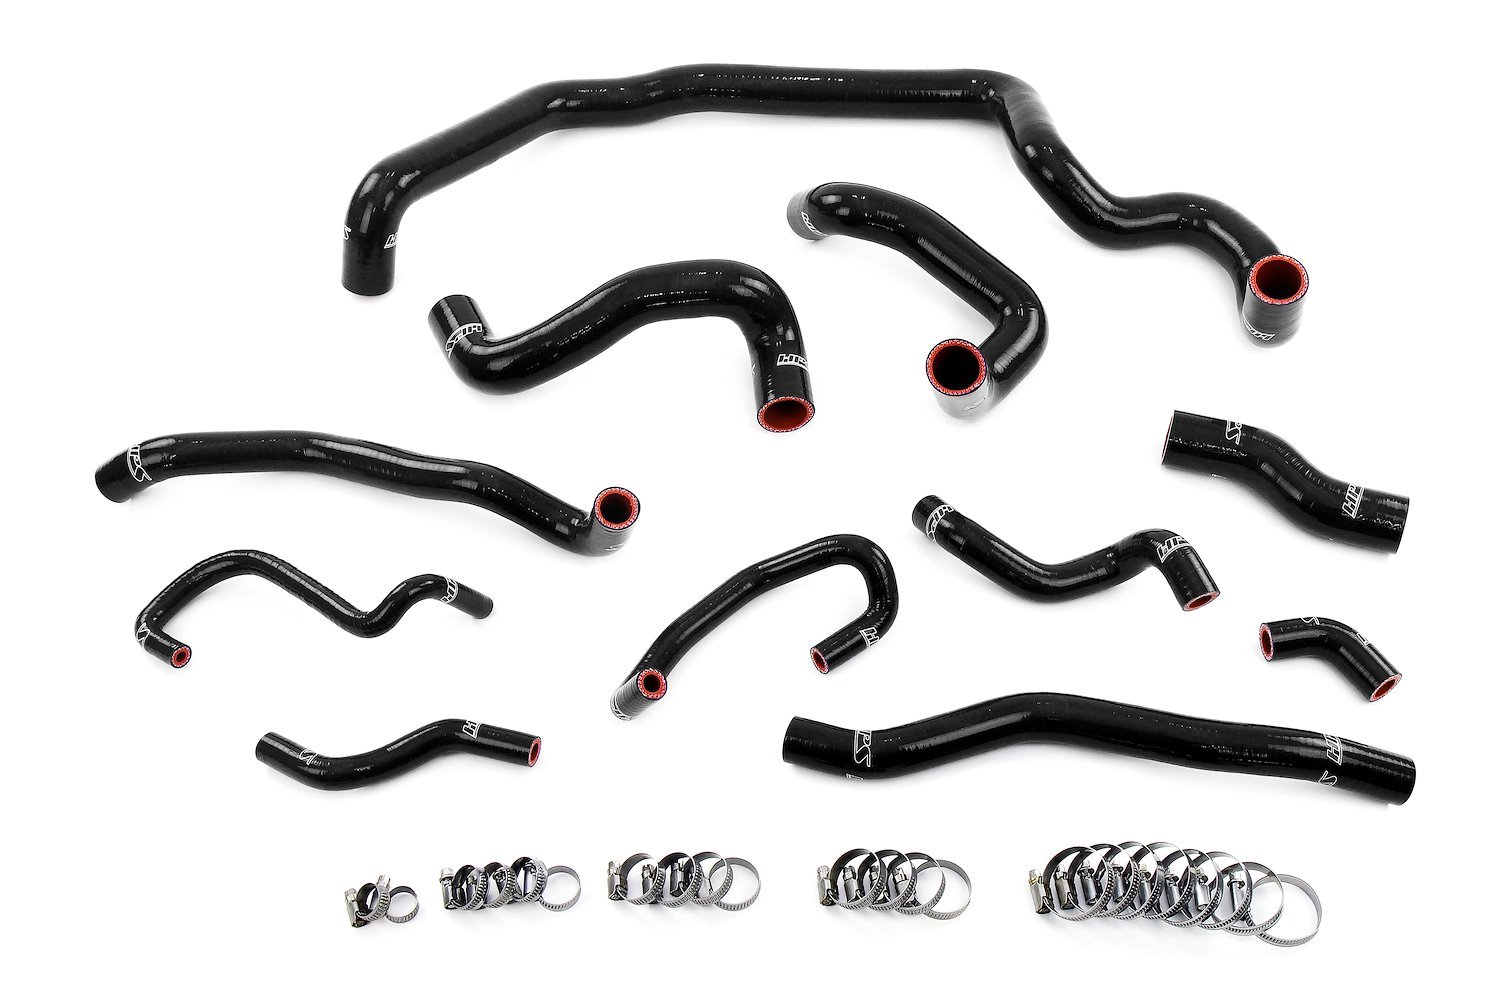 57-1995-BLK Coolant Hose Kit, 3-Ply Reinforced Silicone Hoses, For Radiator, Heater, Water Pump, Expansion Tank